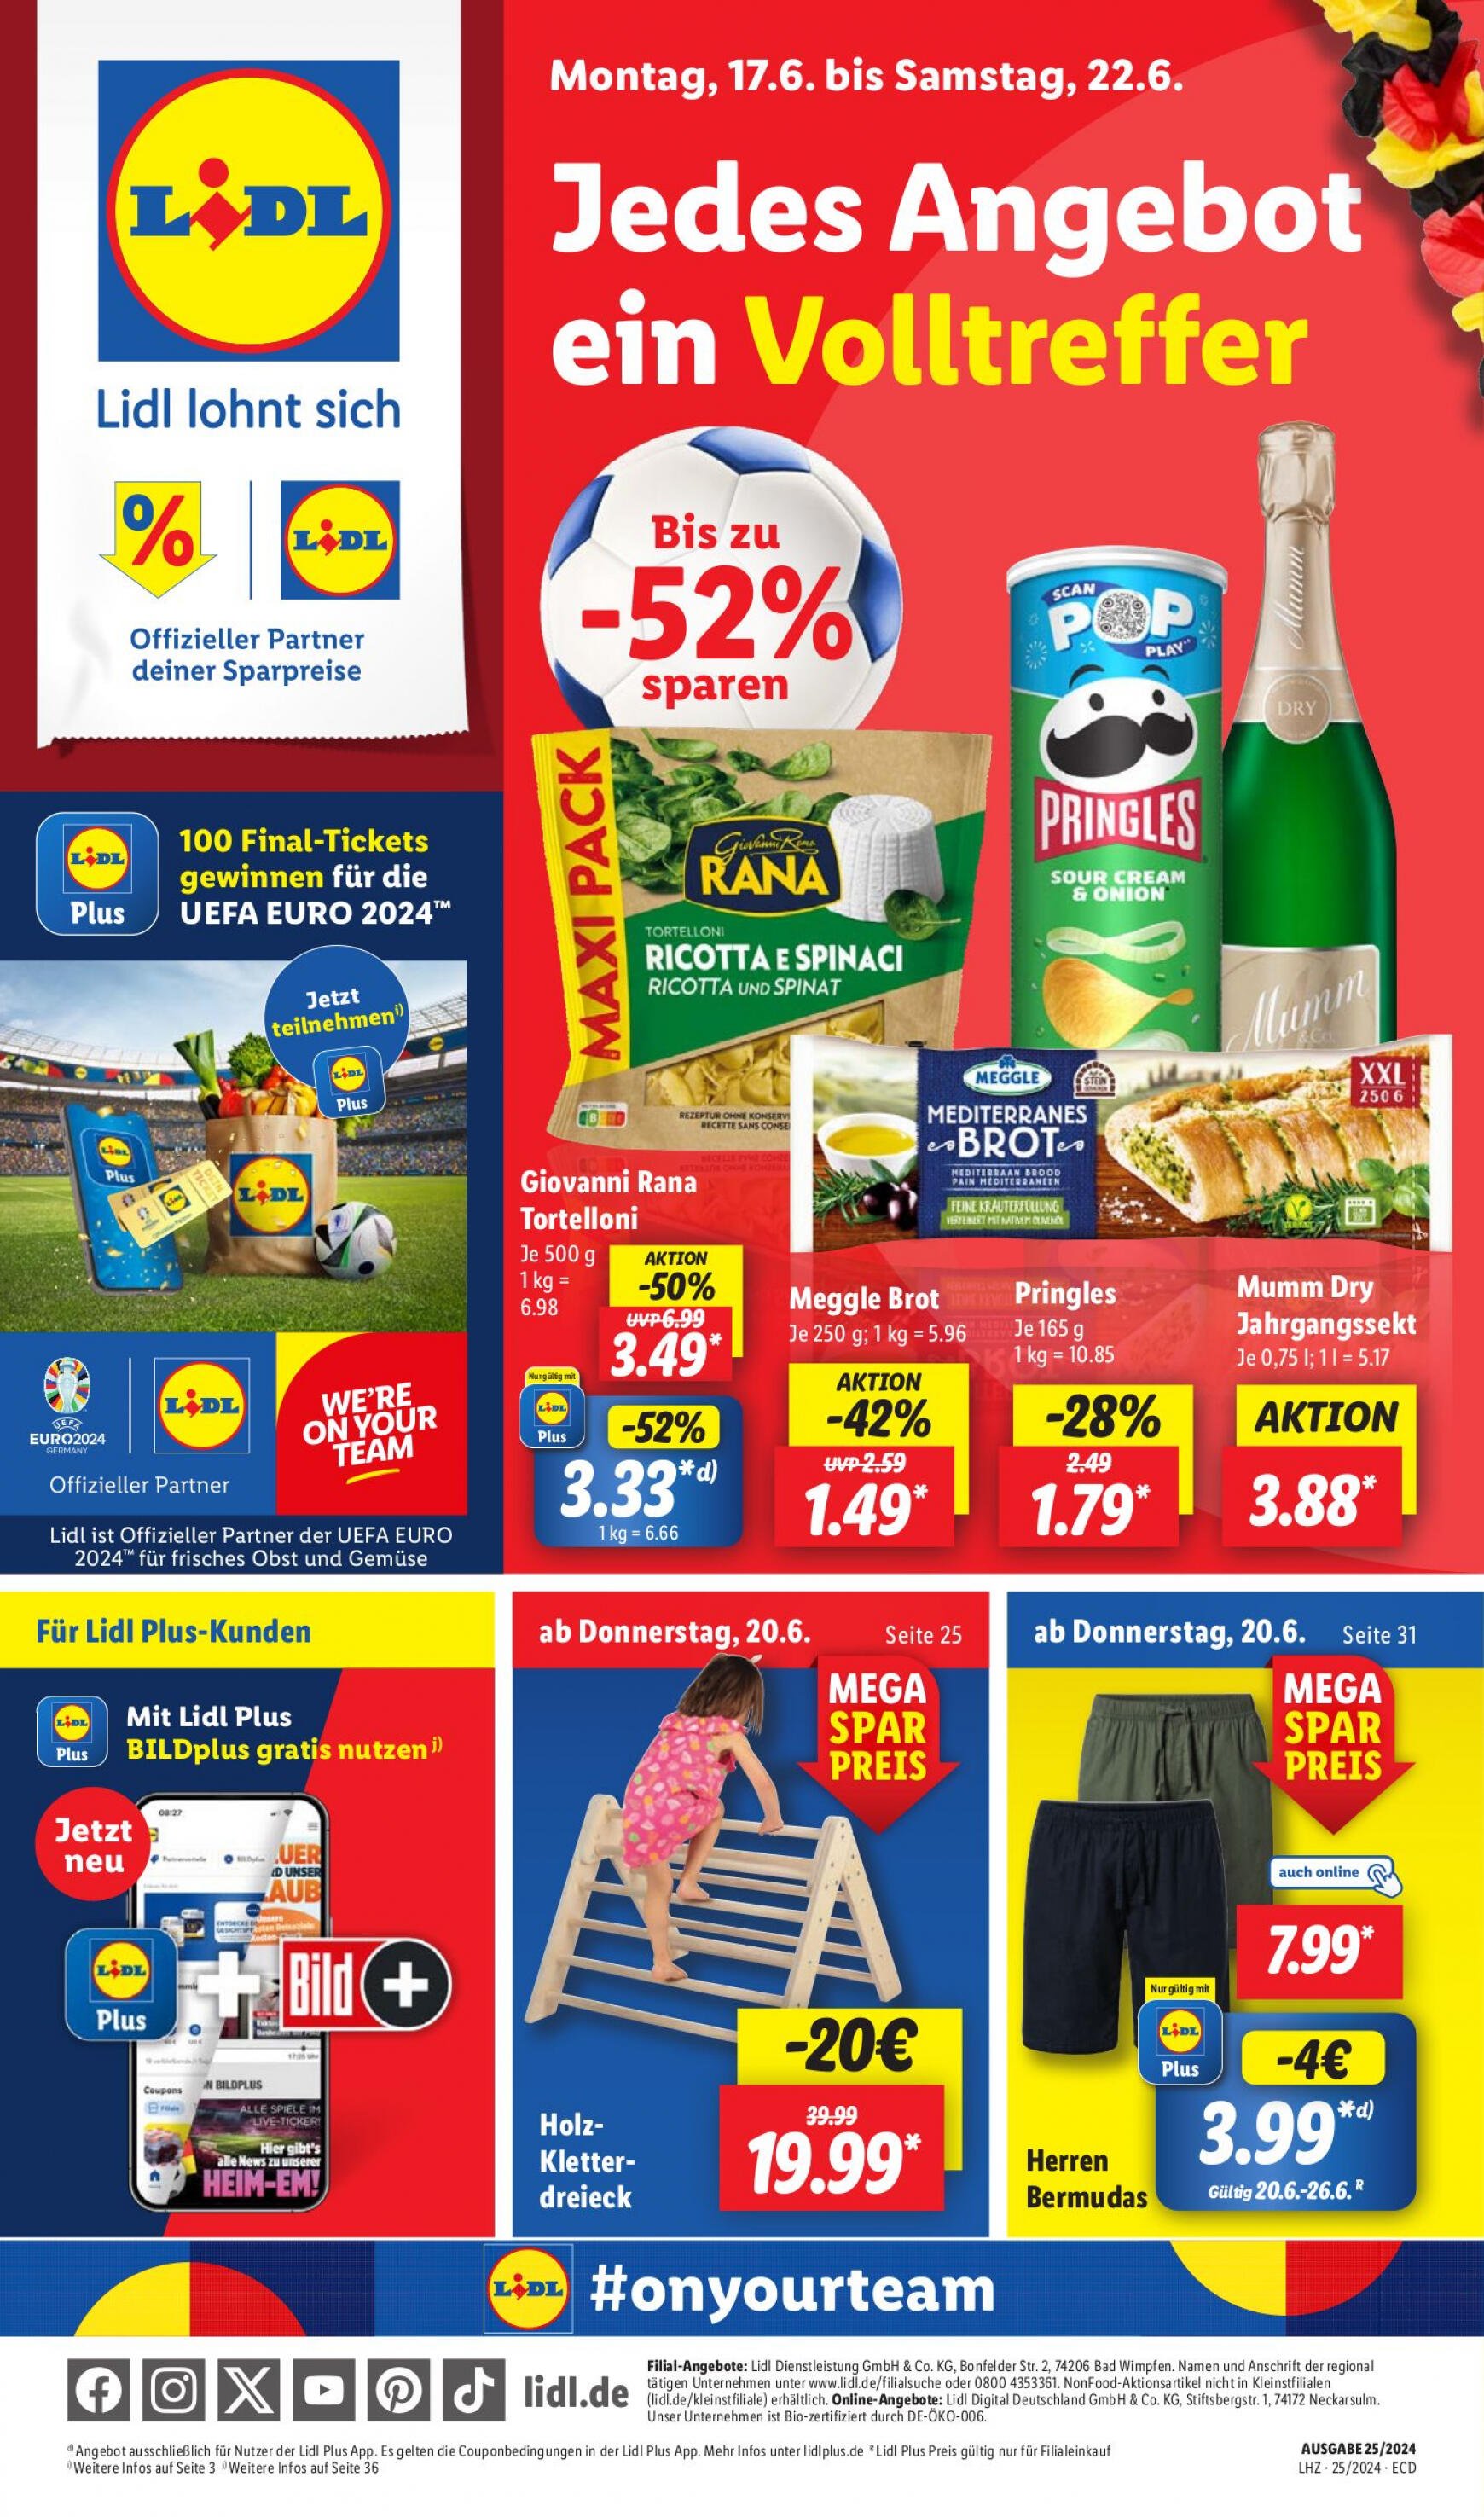 lidl - Flyer Lidl aktuell 17.06. - 22.06. - page: 1